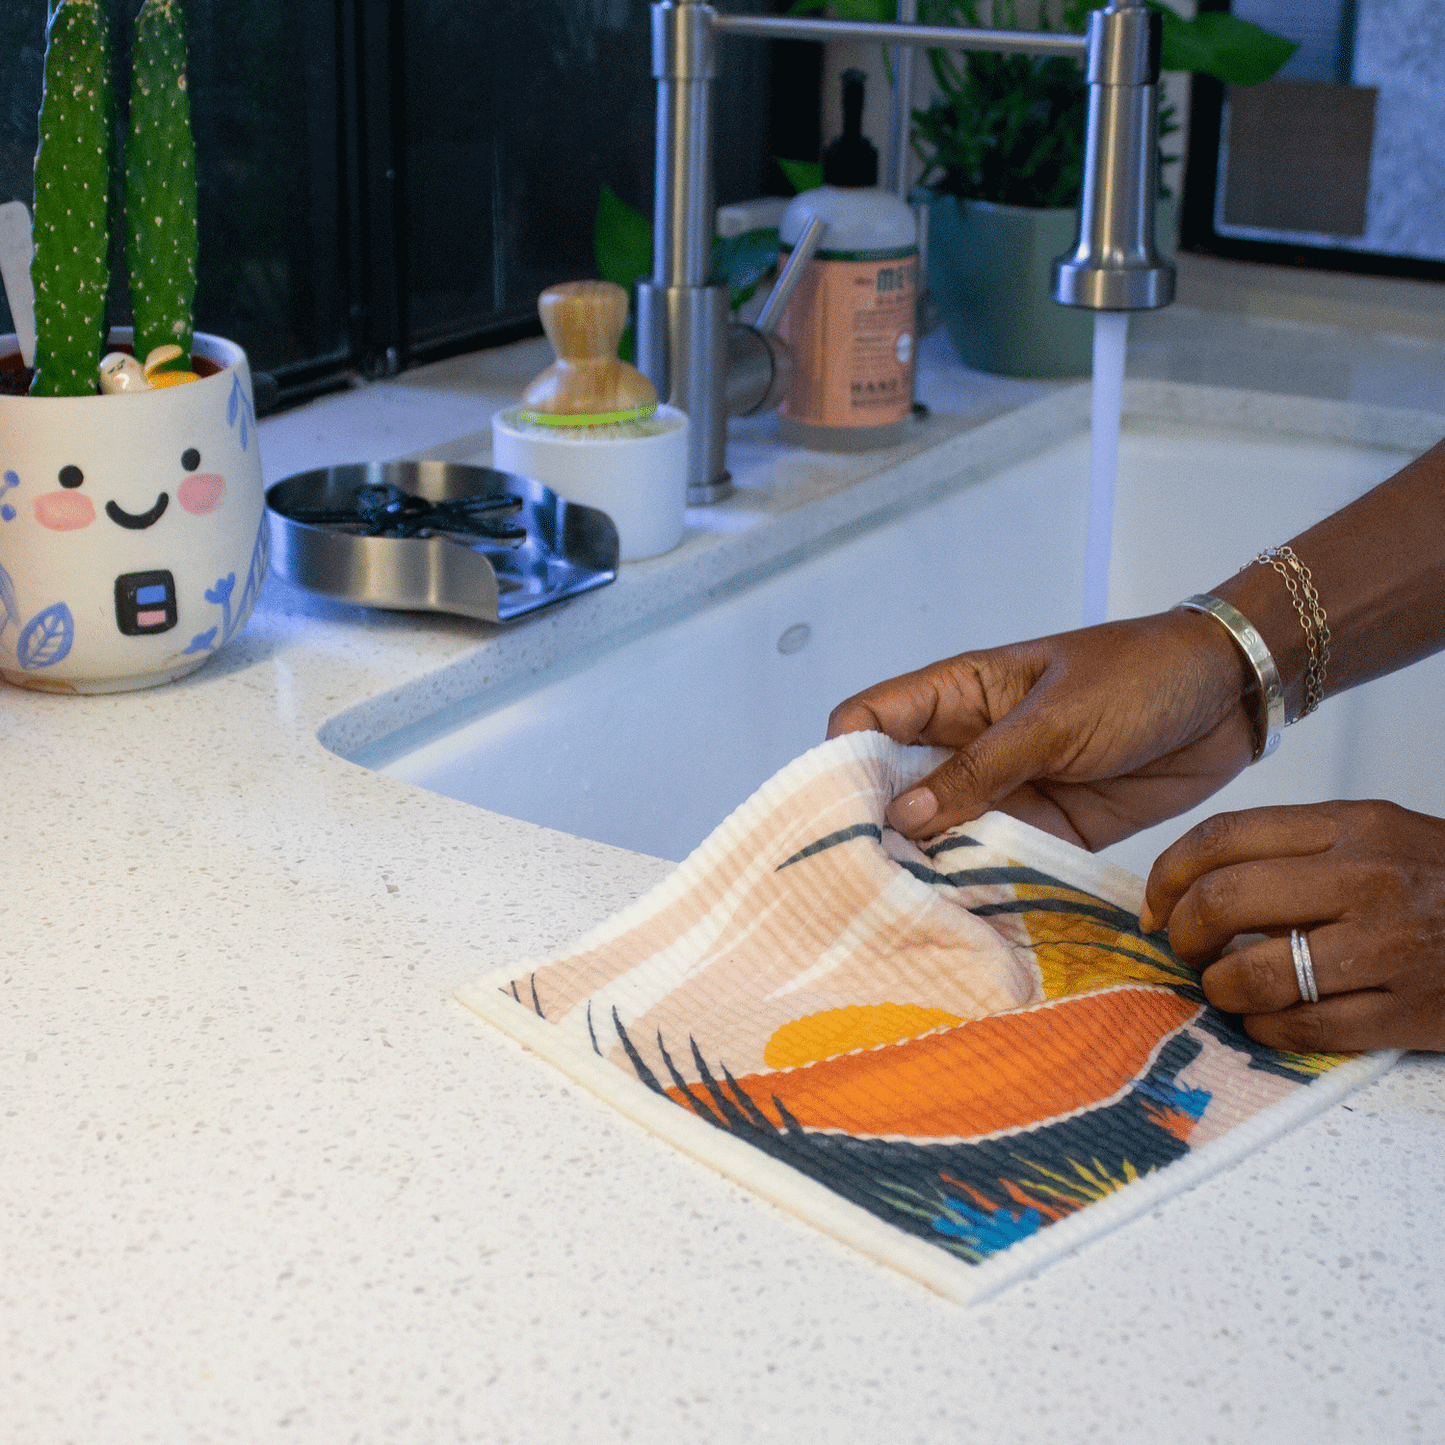 Two hands hold a Desert Oasis Super Cloth near the edge of a sink. A desert scene with hills, plants, and a sun is printed on the sponge cloth. The sponge cloth is bending in soft folds. Kitchen items such as soap, some succulents, and a scrub brush are in the background.